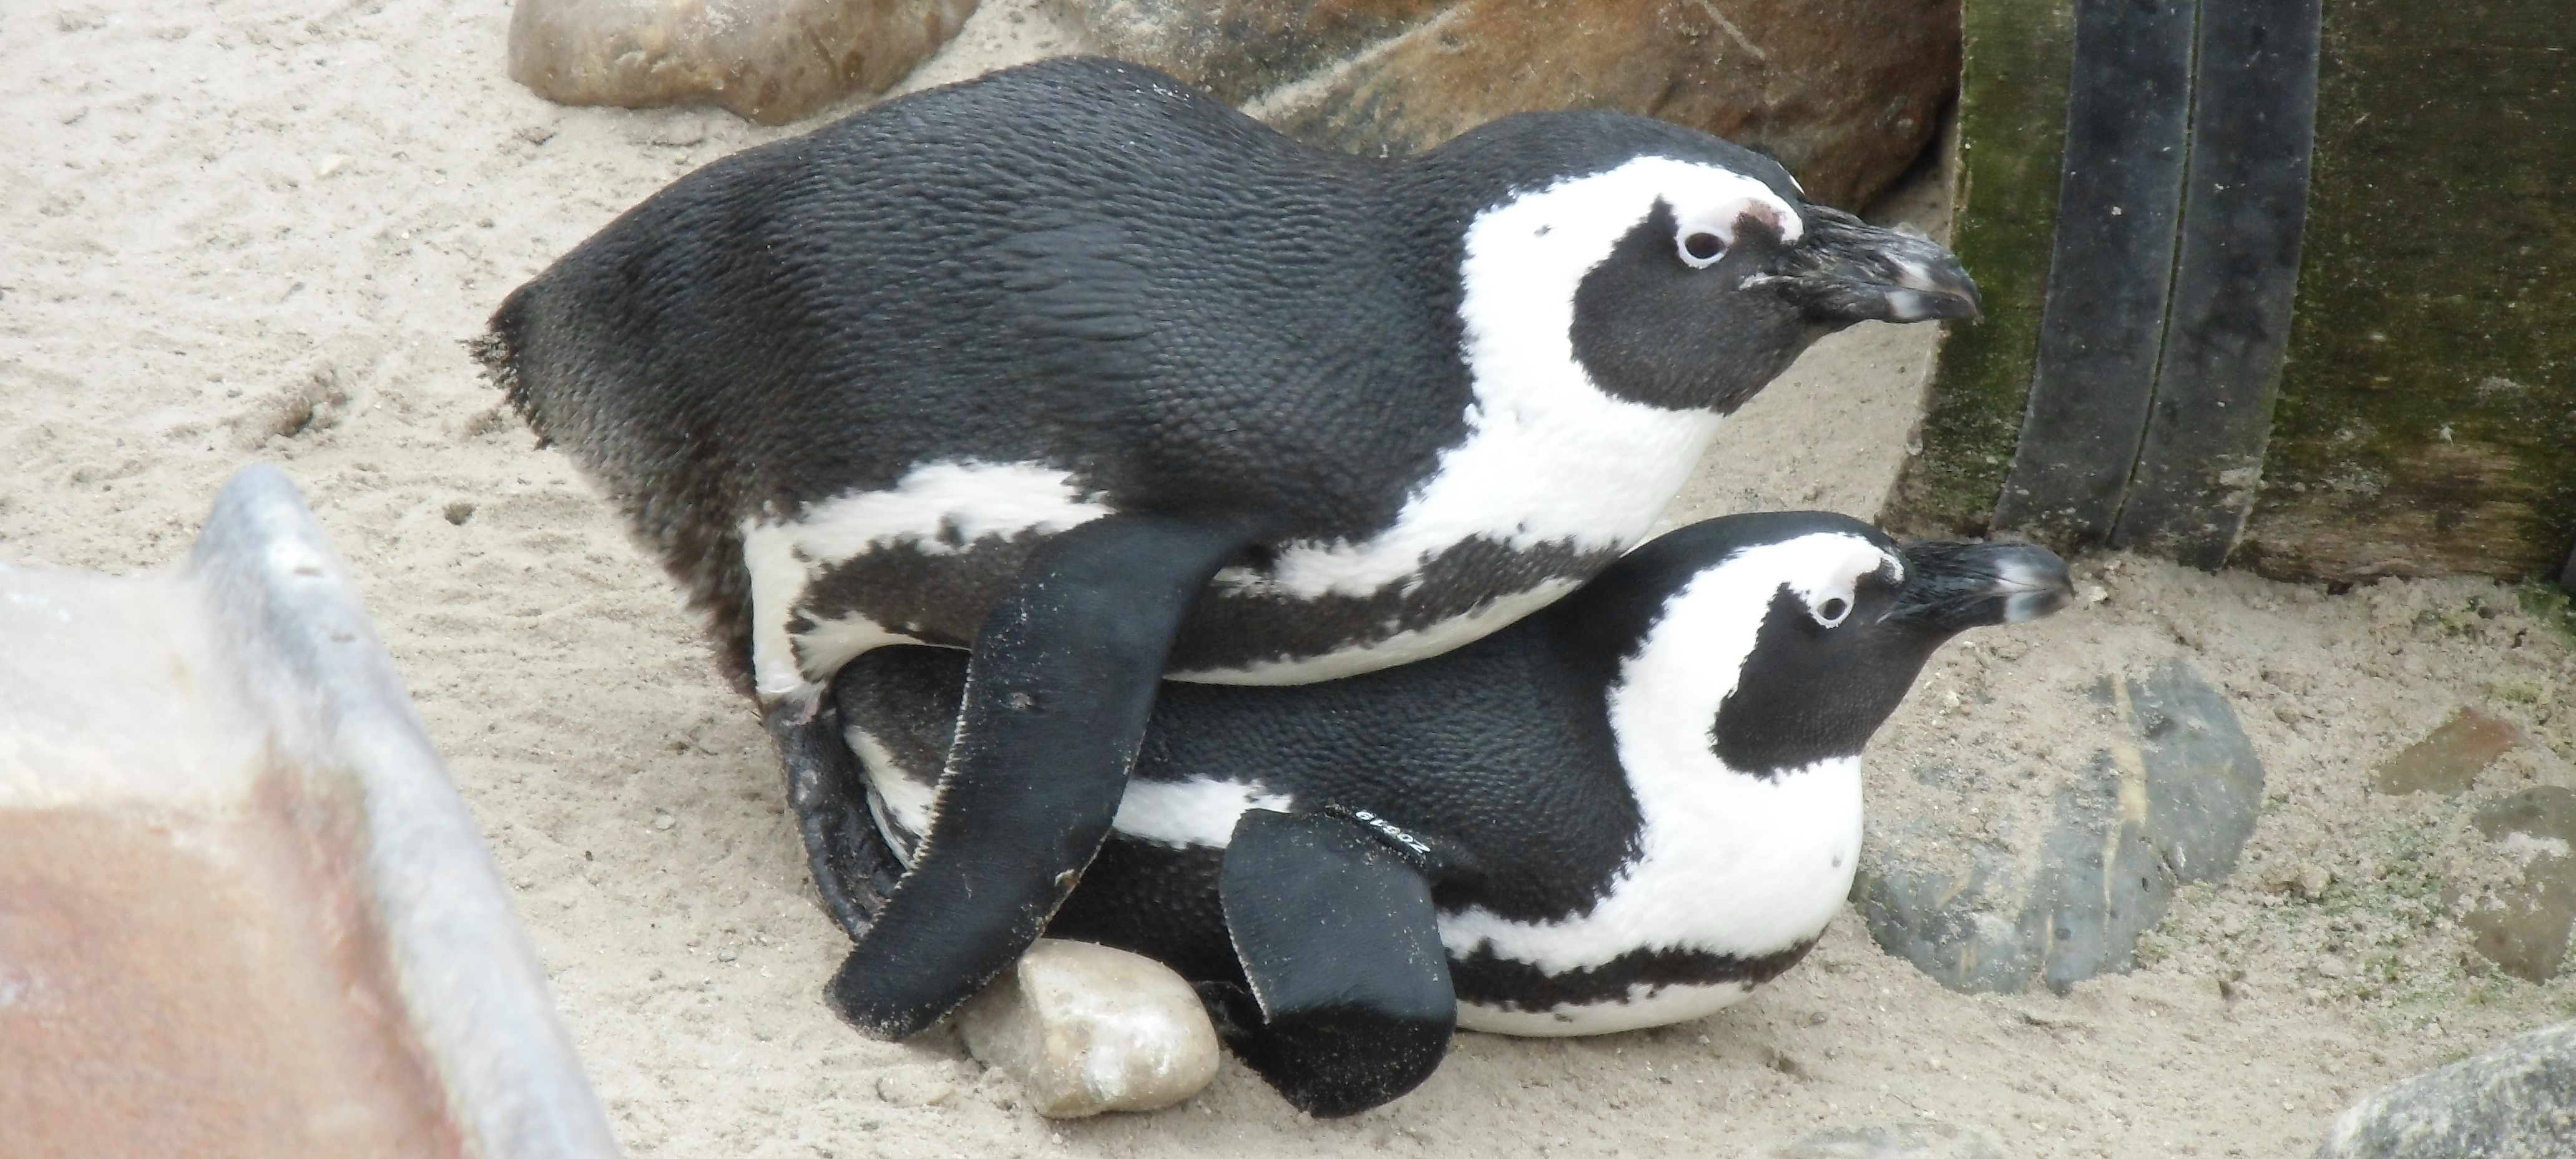 Copulation of African Penguins: the male sits on the female